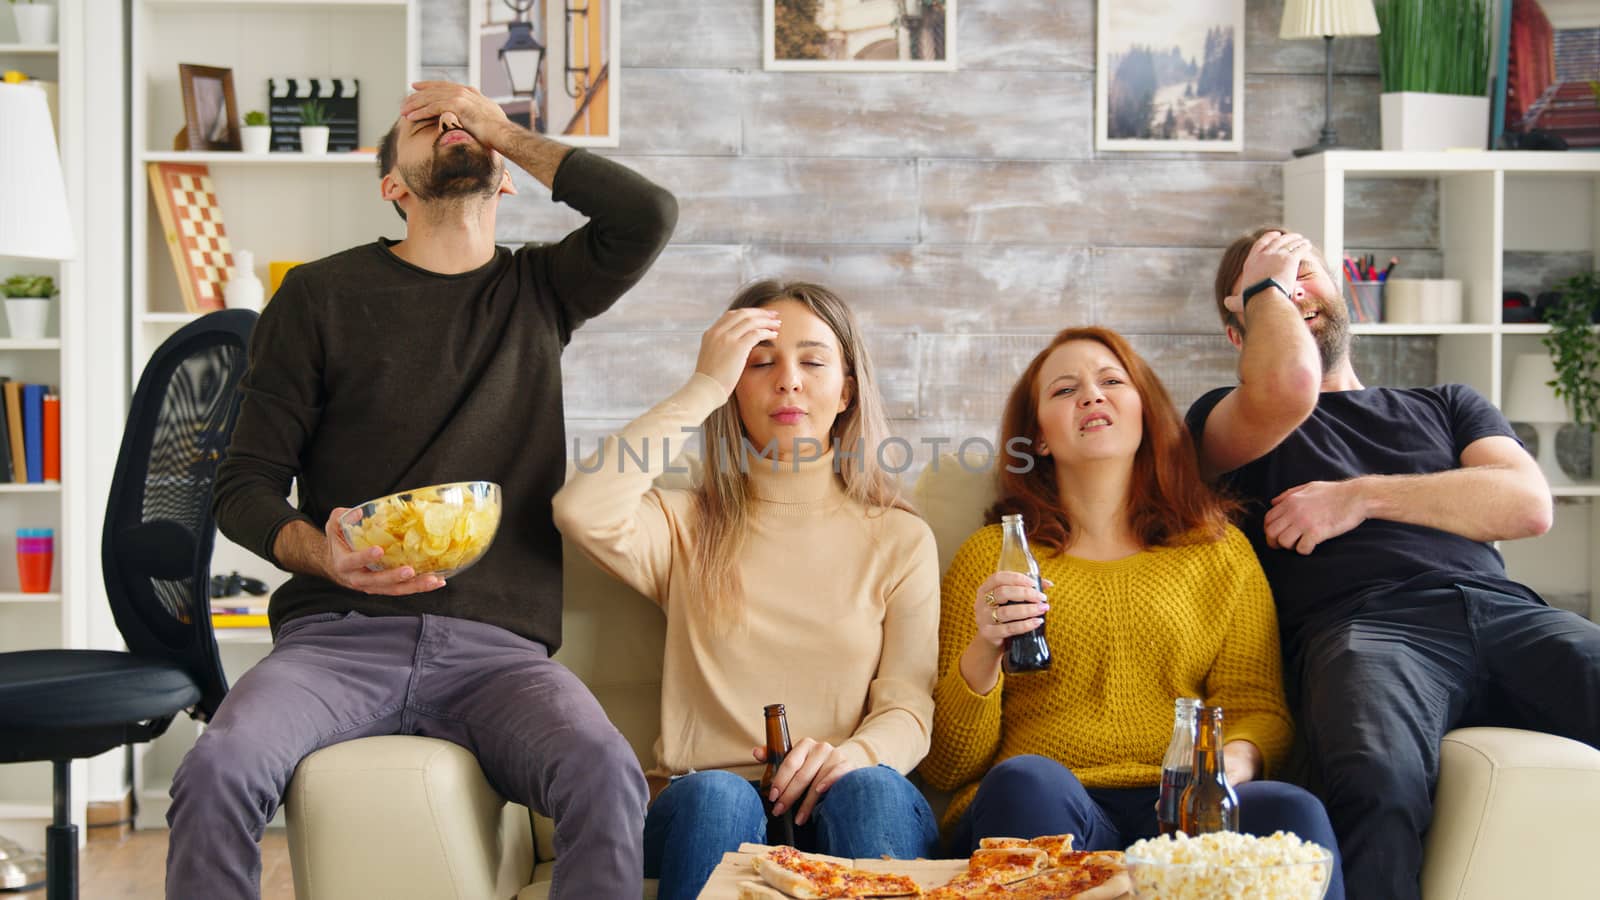 Two couples cheering up while watching a football match on tv in living room drinking beer and eating pizza.